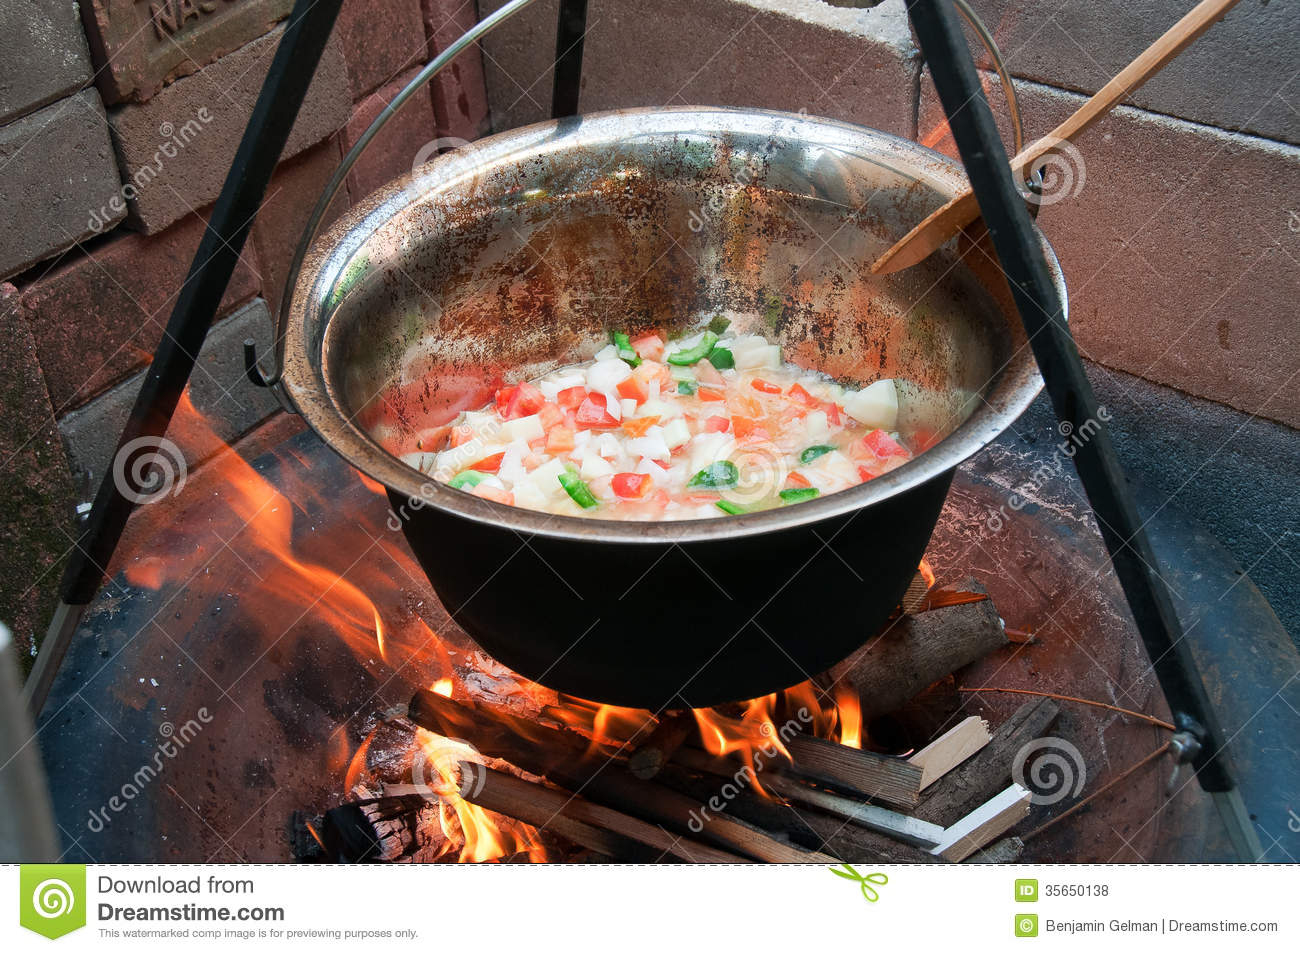 Hungarian Goulash Cooked In A Copper Pot Over A Fire In The Backyard